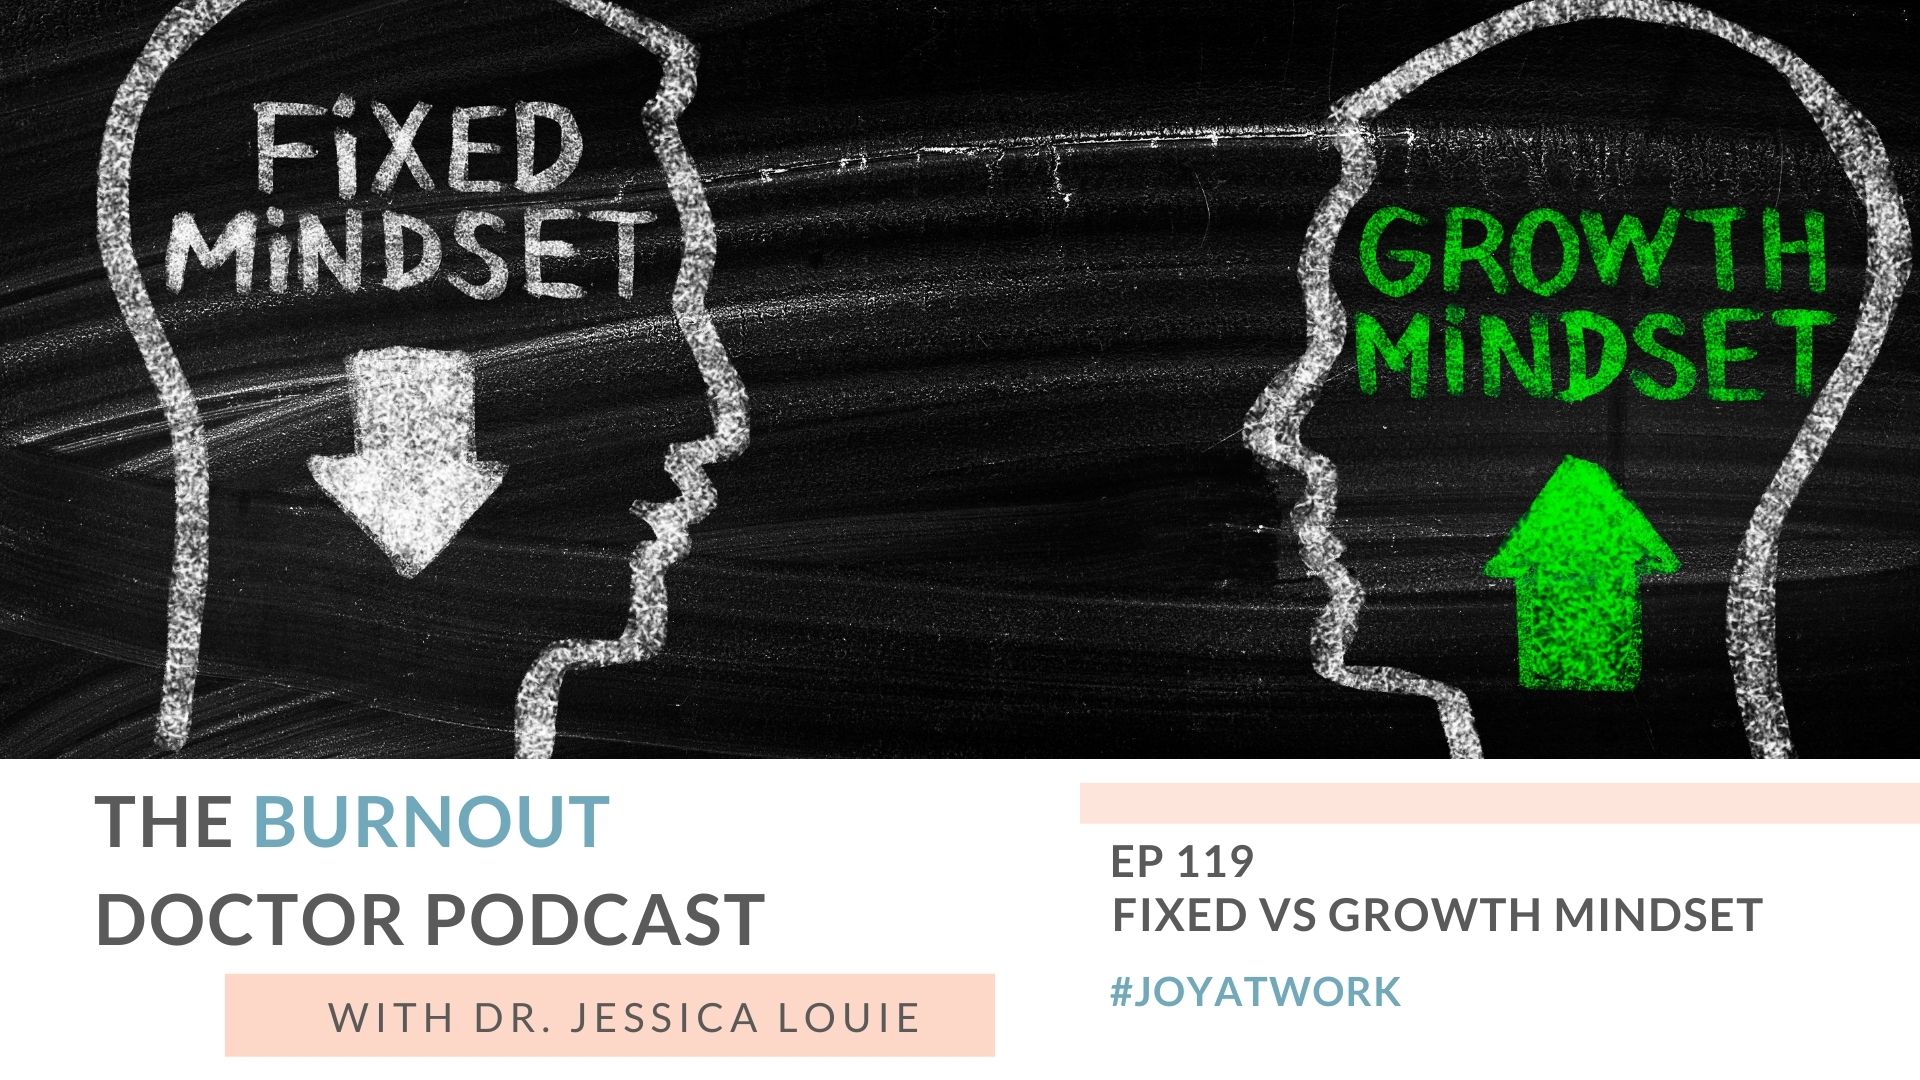 Fixed versus growth mindset for burnout. How to increase growth mindset to help pharmacist burnout. Keynote speaker on burnout, simplifying and well-being. The Burnout Doctor Podcast with Dr. Jessica Louie. Carol Dweck Mindset.